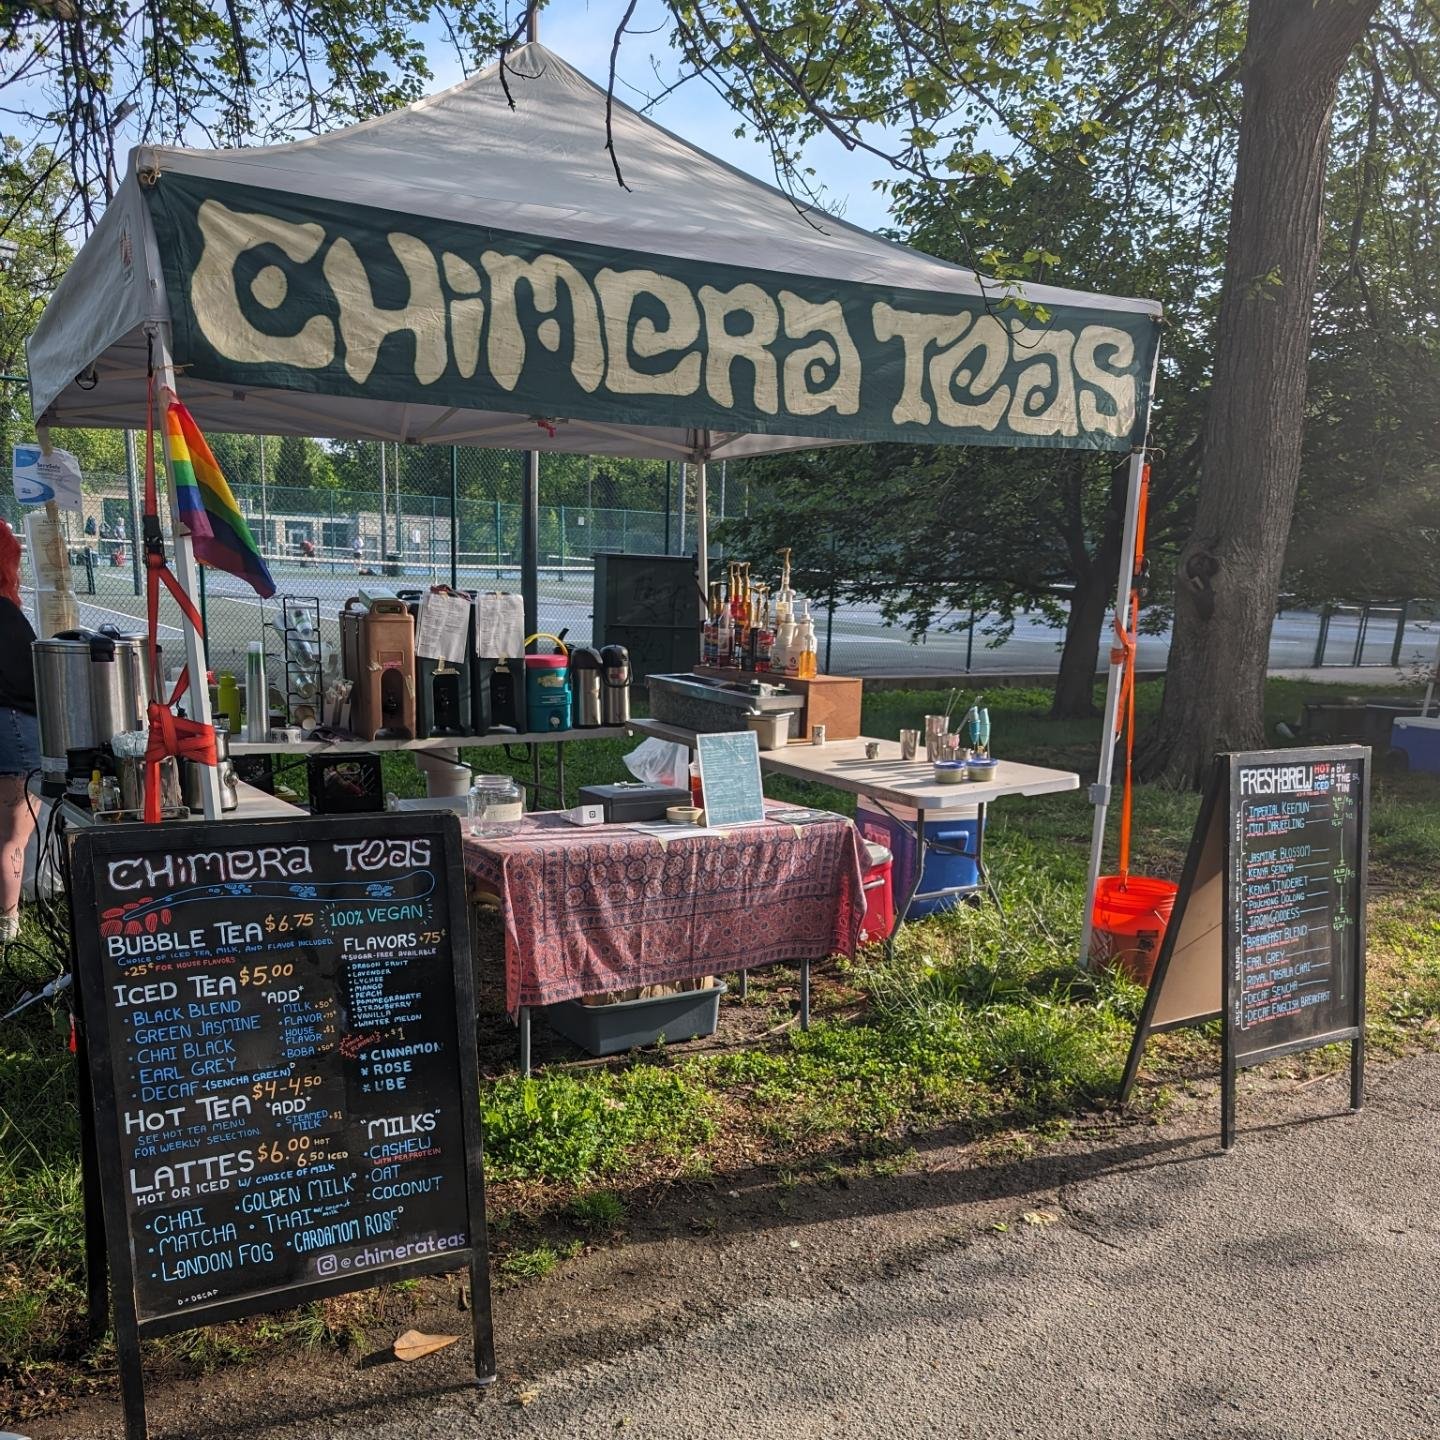 It's sunny out! 🌞😎
What a wonderful day to check out the Tower Grove Farmers Market 🌈
May the 4th be with Boba ✌️🧋💕
Find us between the tennis courts and the fountain now until 12:30.
We're also open at the cafe today until 6pm 💕

@tgfarmersmar